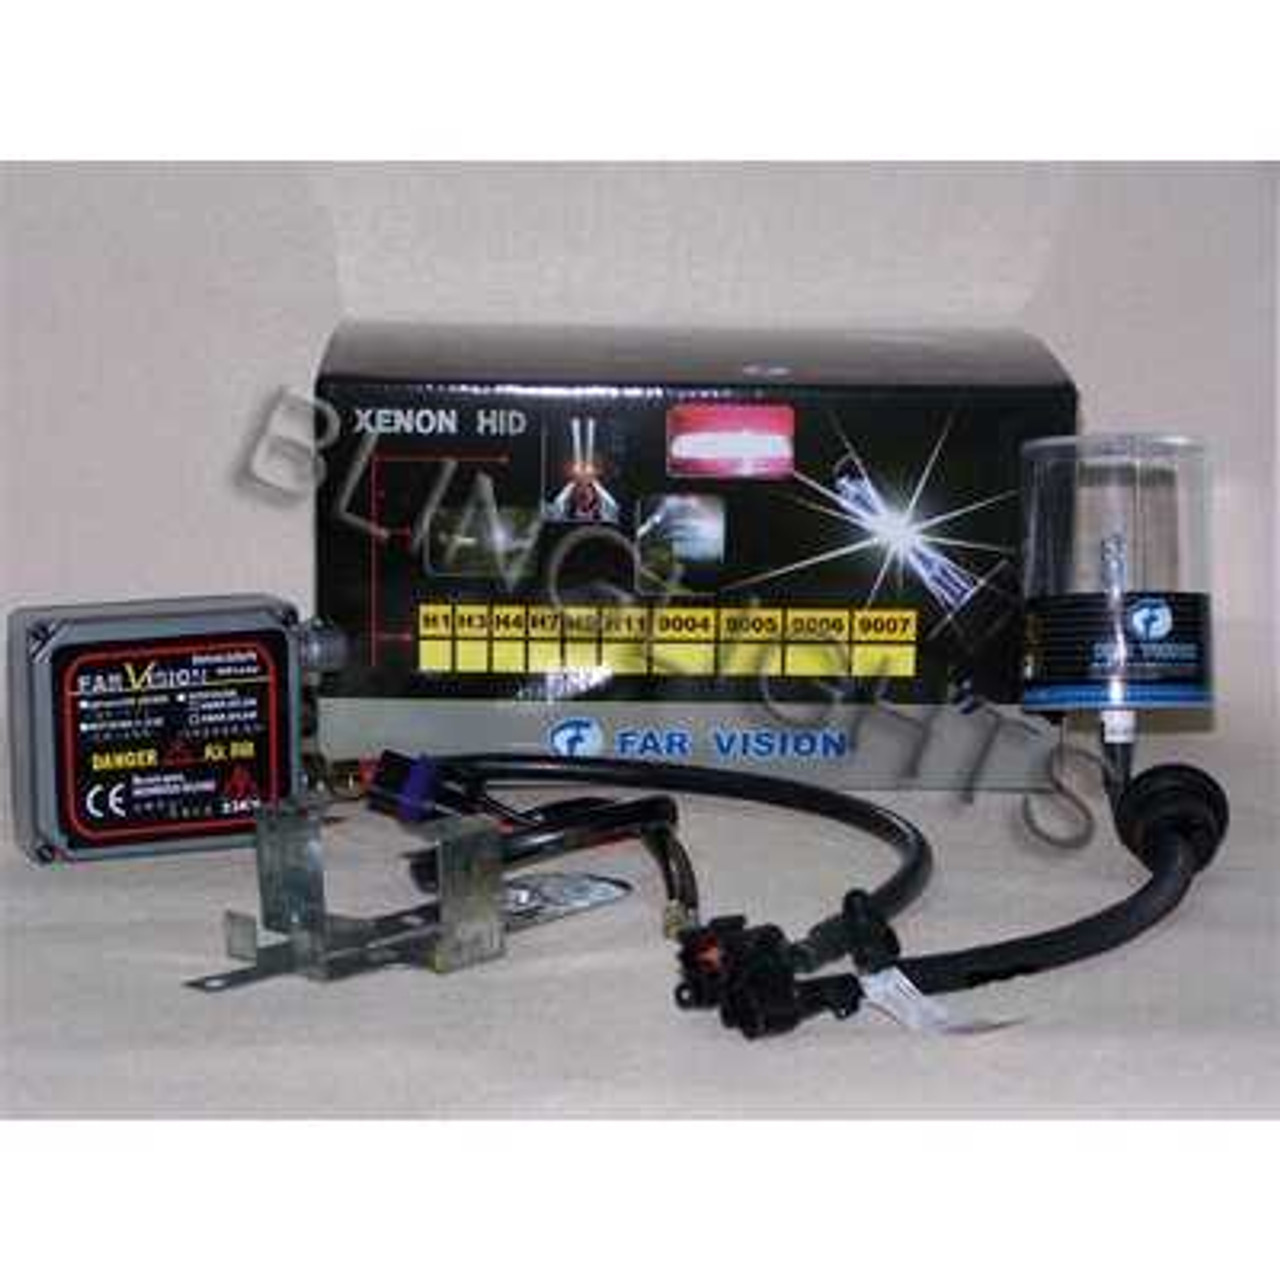 Toyota Corolla Xenon HID Conversion Kit for Headlamps Headlights Head Lamps HIDs Lights